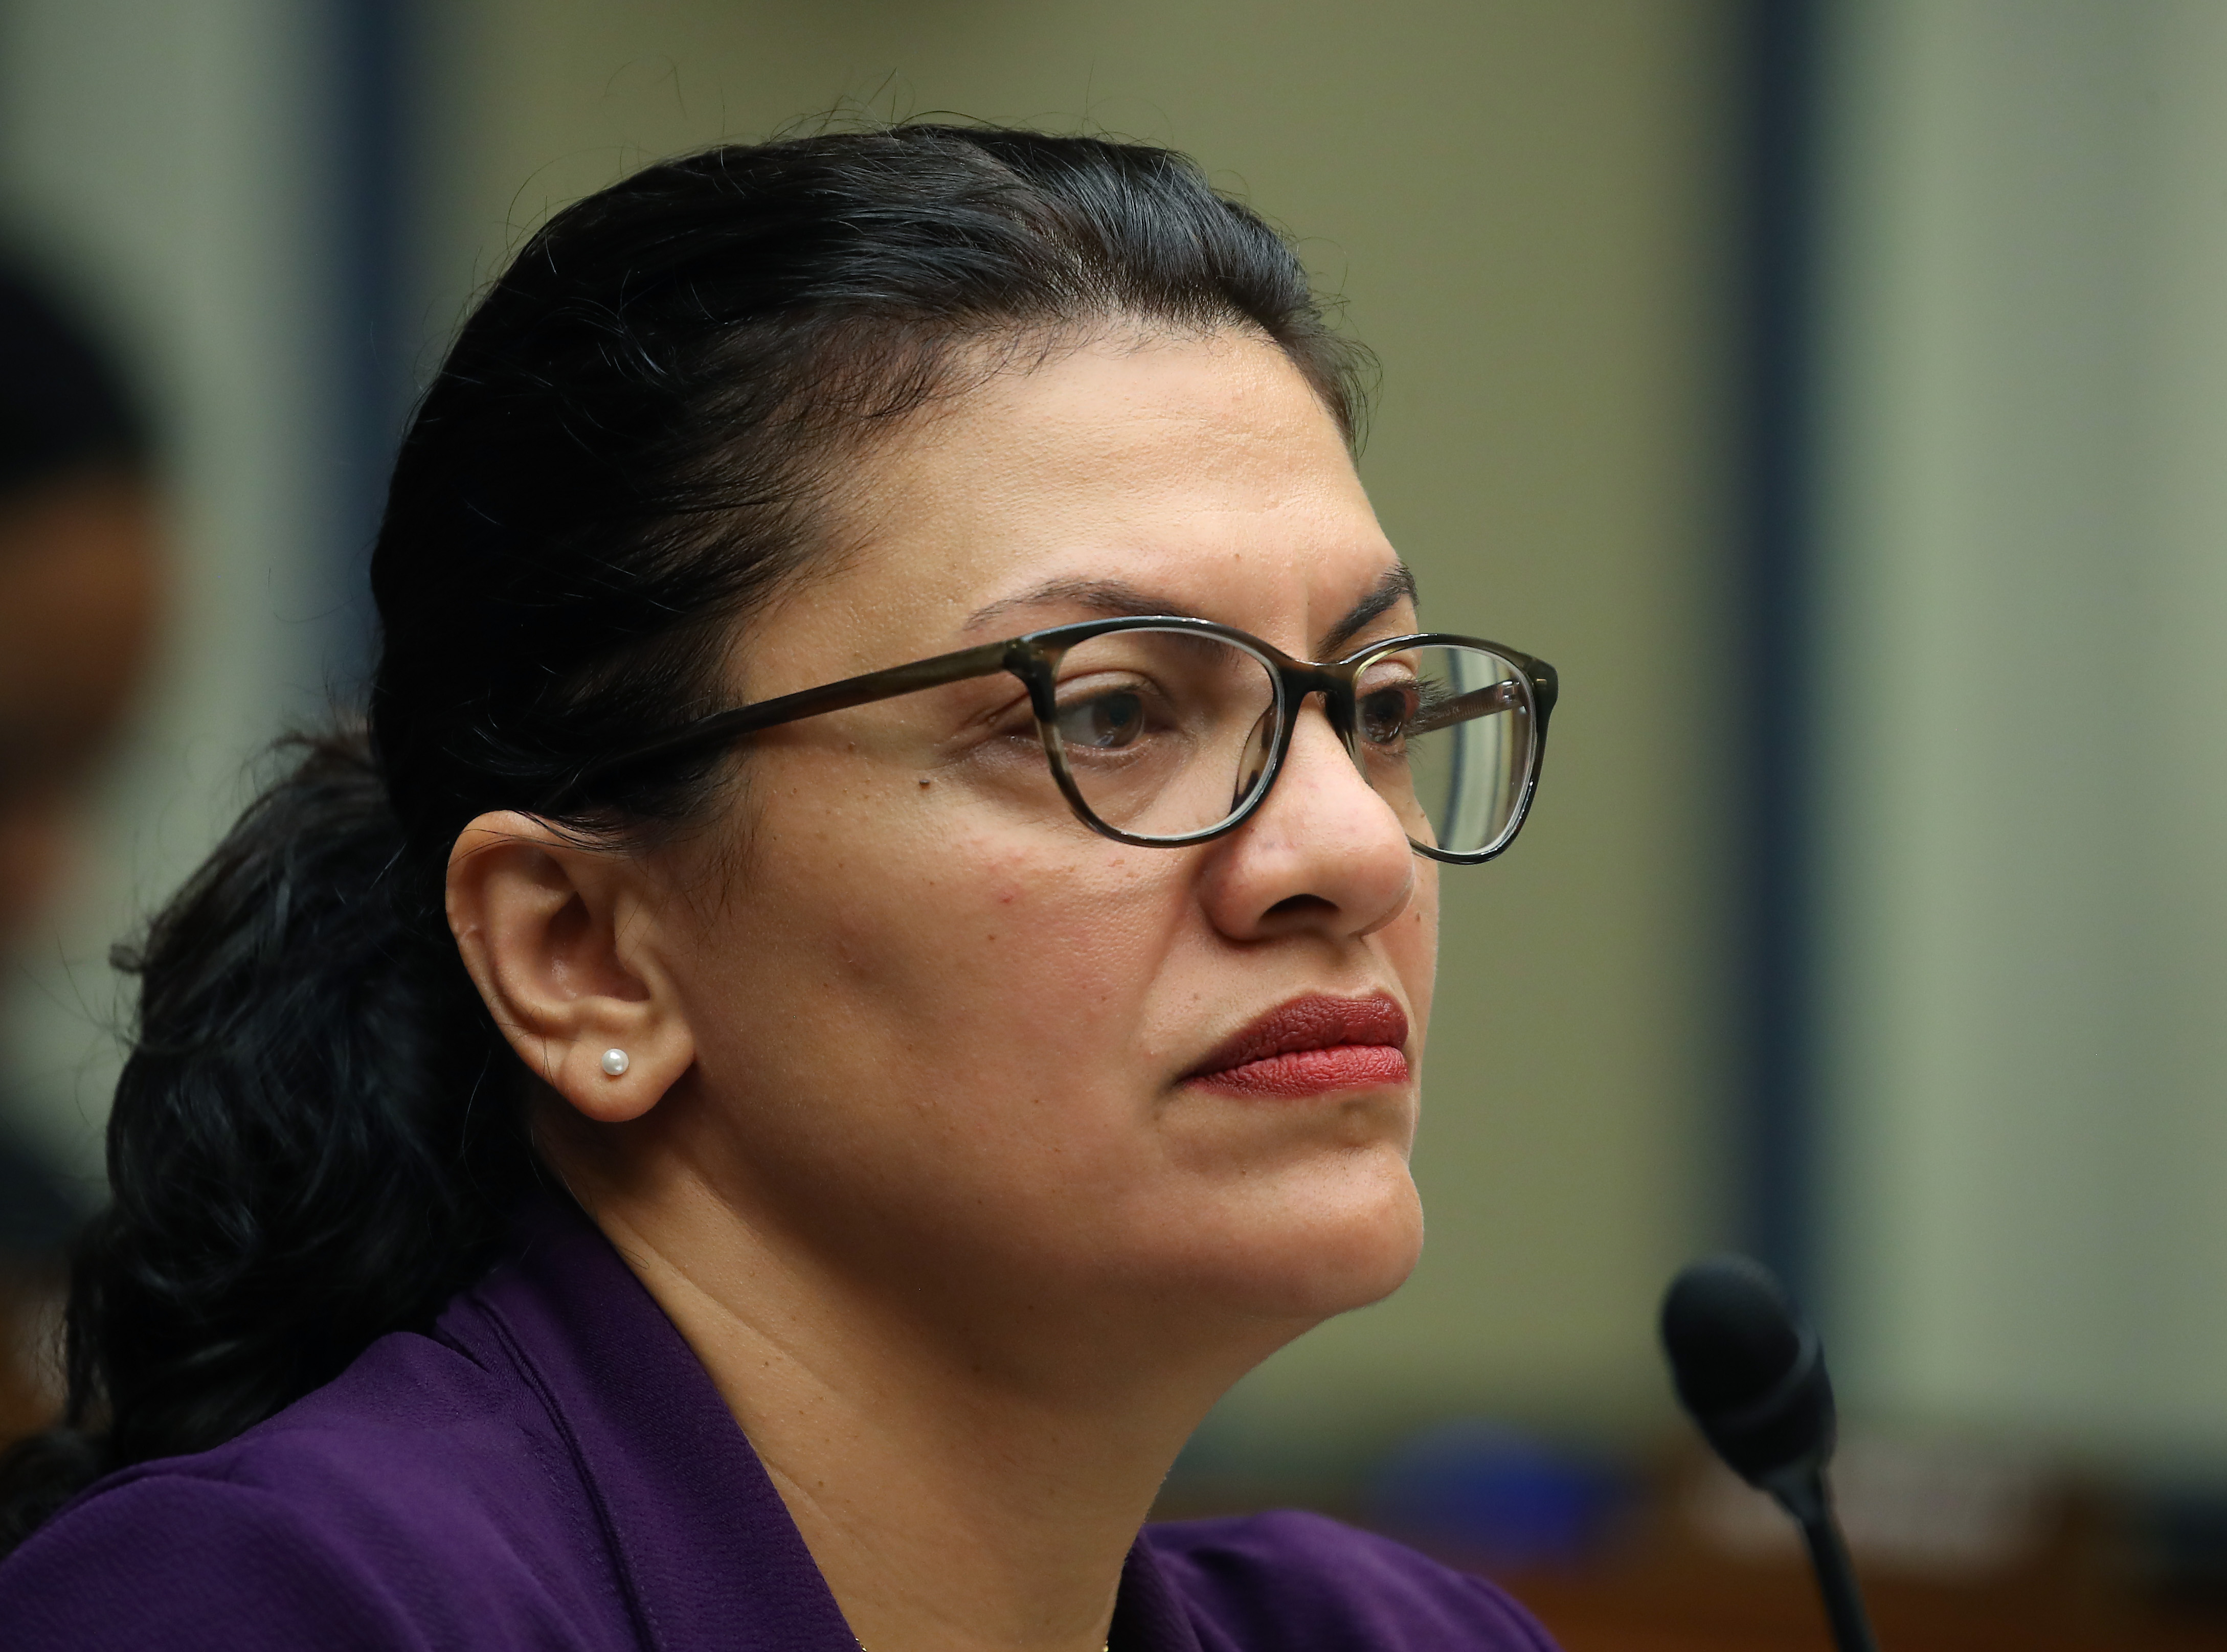 Rep. Rashida Tlaib (D-MI) participates in a House Oversight and Reform Sub-Committee hearing on Capitol Hill, September 24, 2019 in Washington, DC. (Mark Wilson/Getty Images)